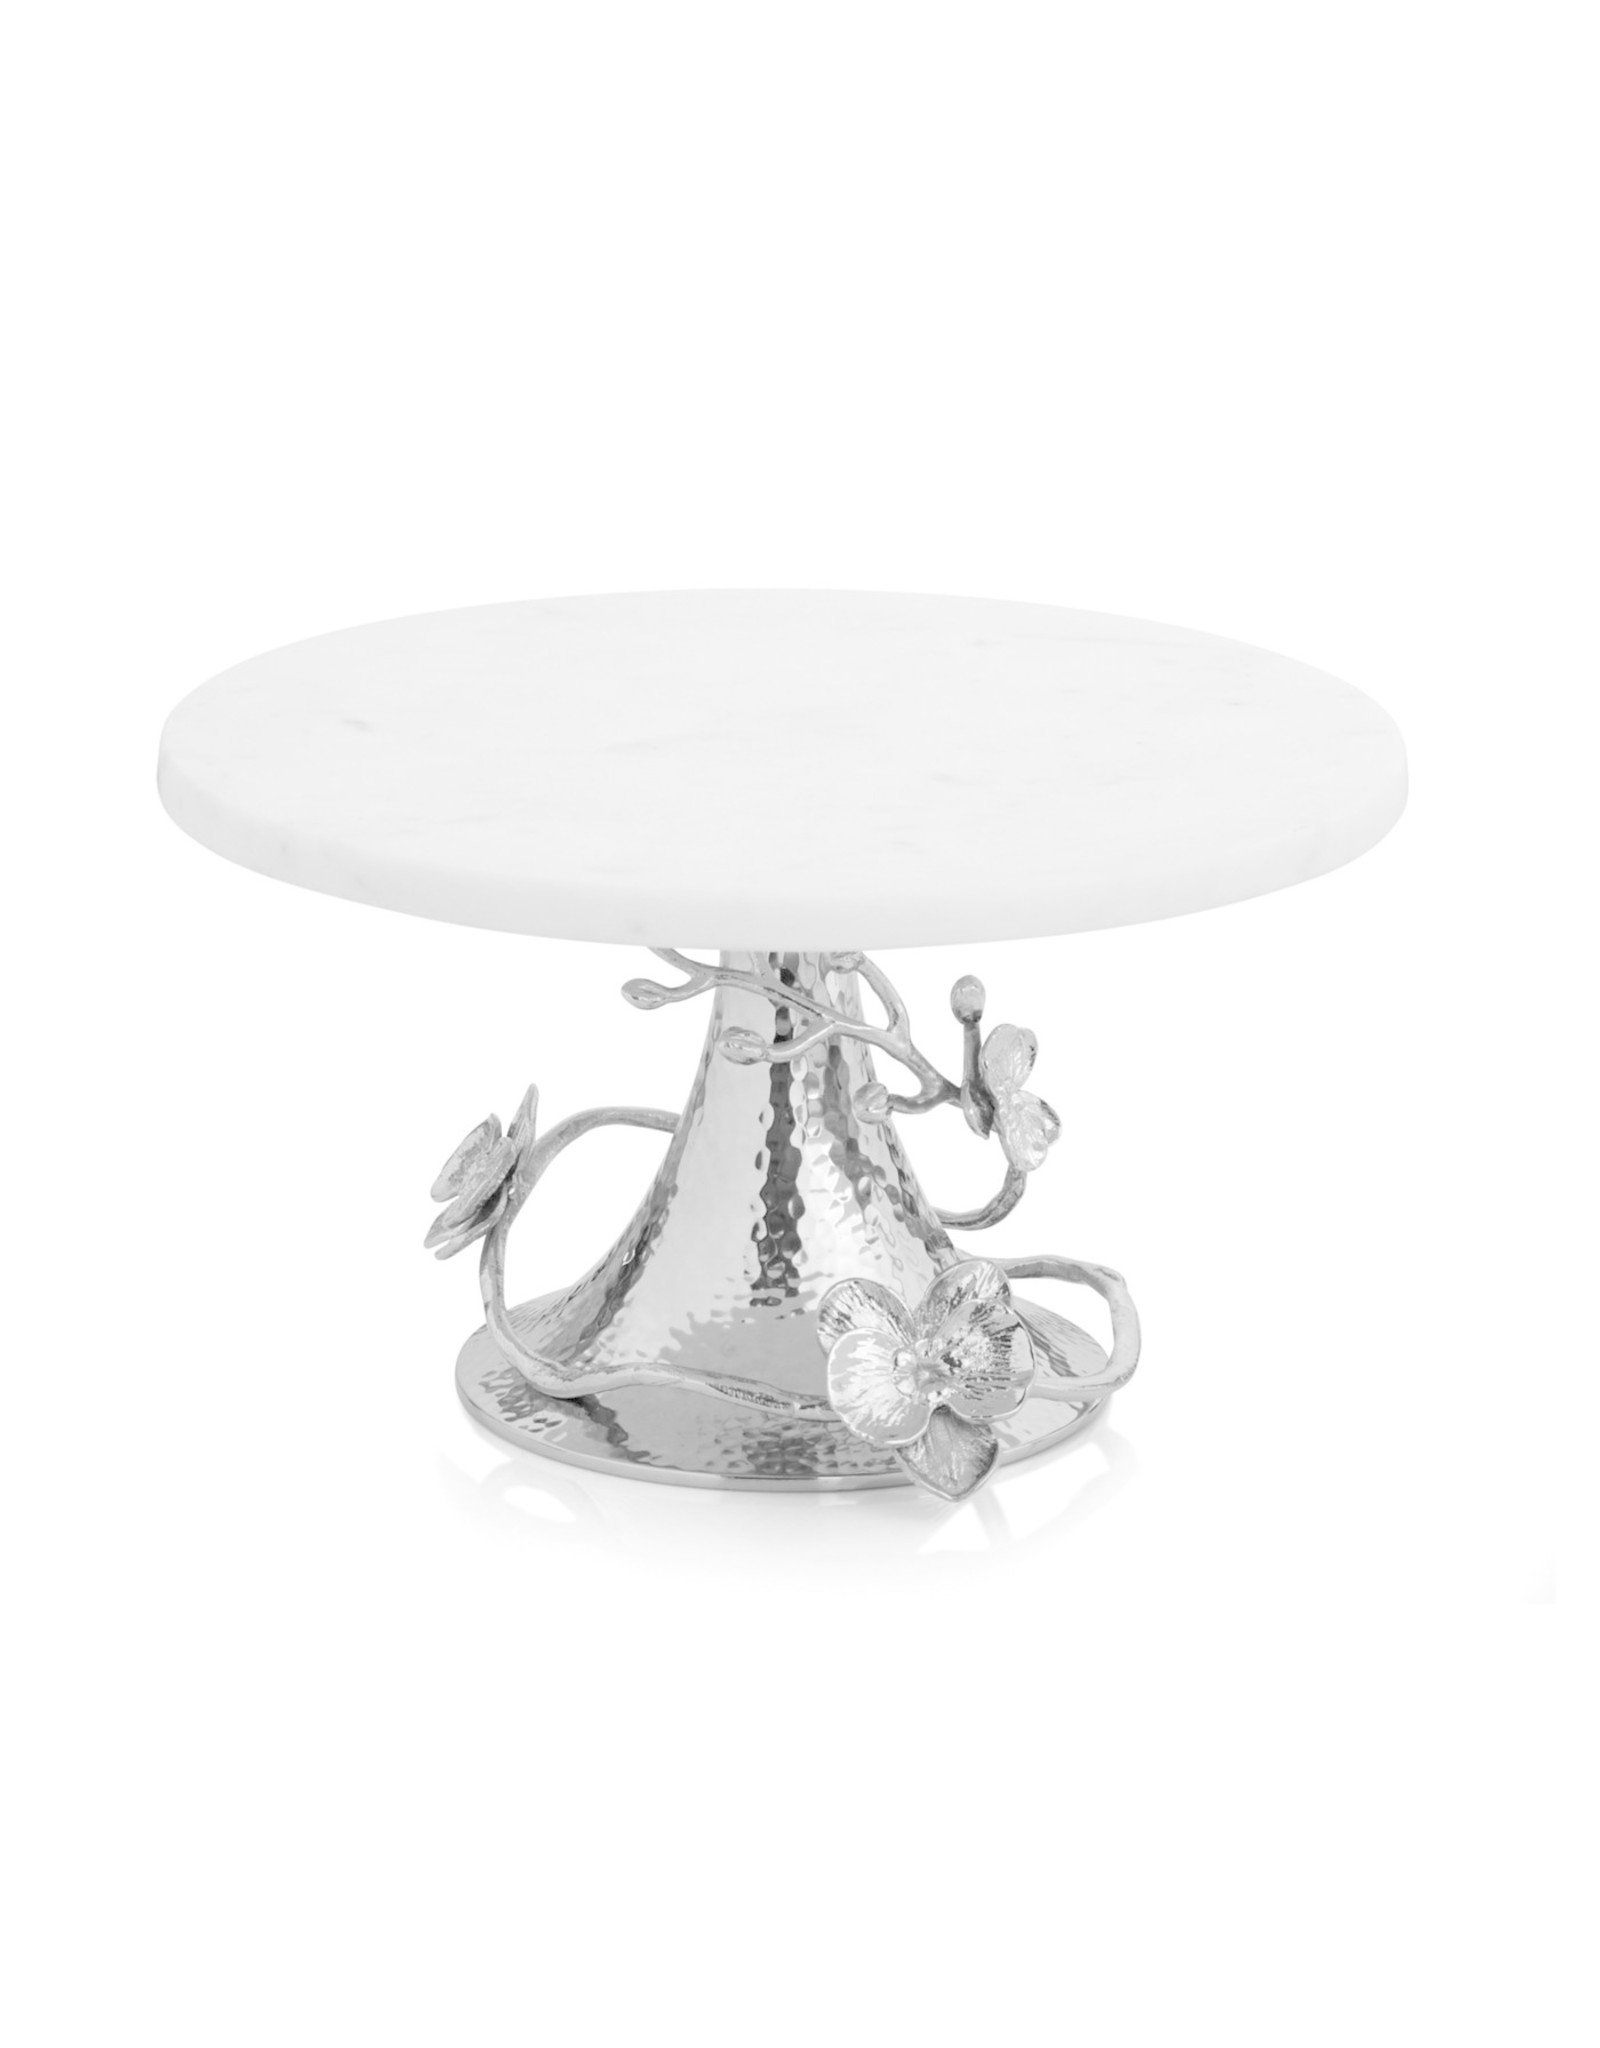 Michael Aram ~ White Orchid ~ Footed Centerpiece Bowl, Price $315.00 in  Scarsdale, NY from La Dentelliere